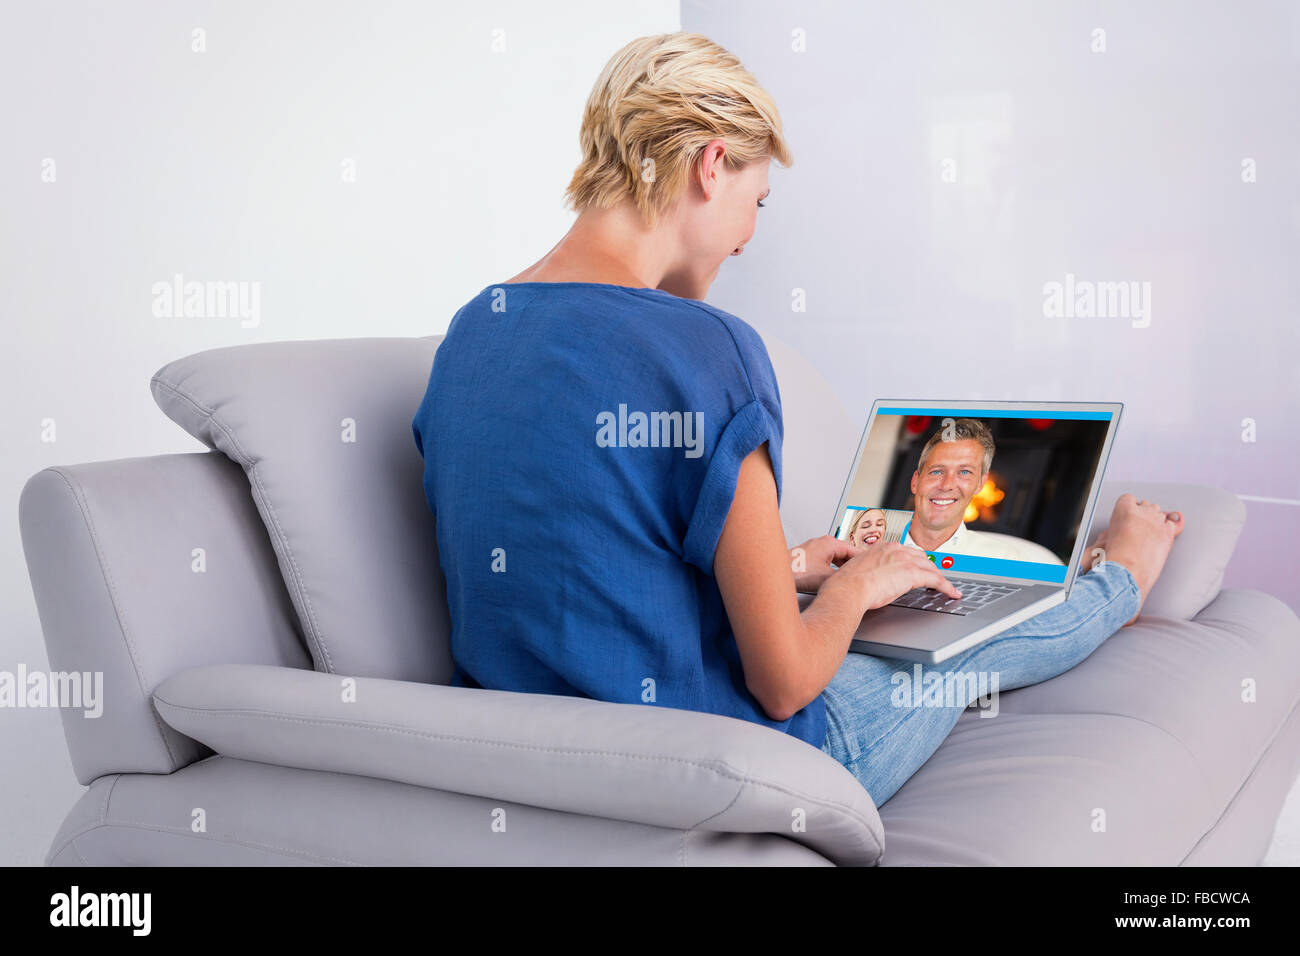 Composite image of blonde woman using her laptop on the couch Stock Photo